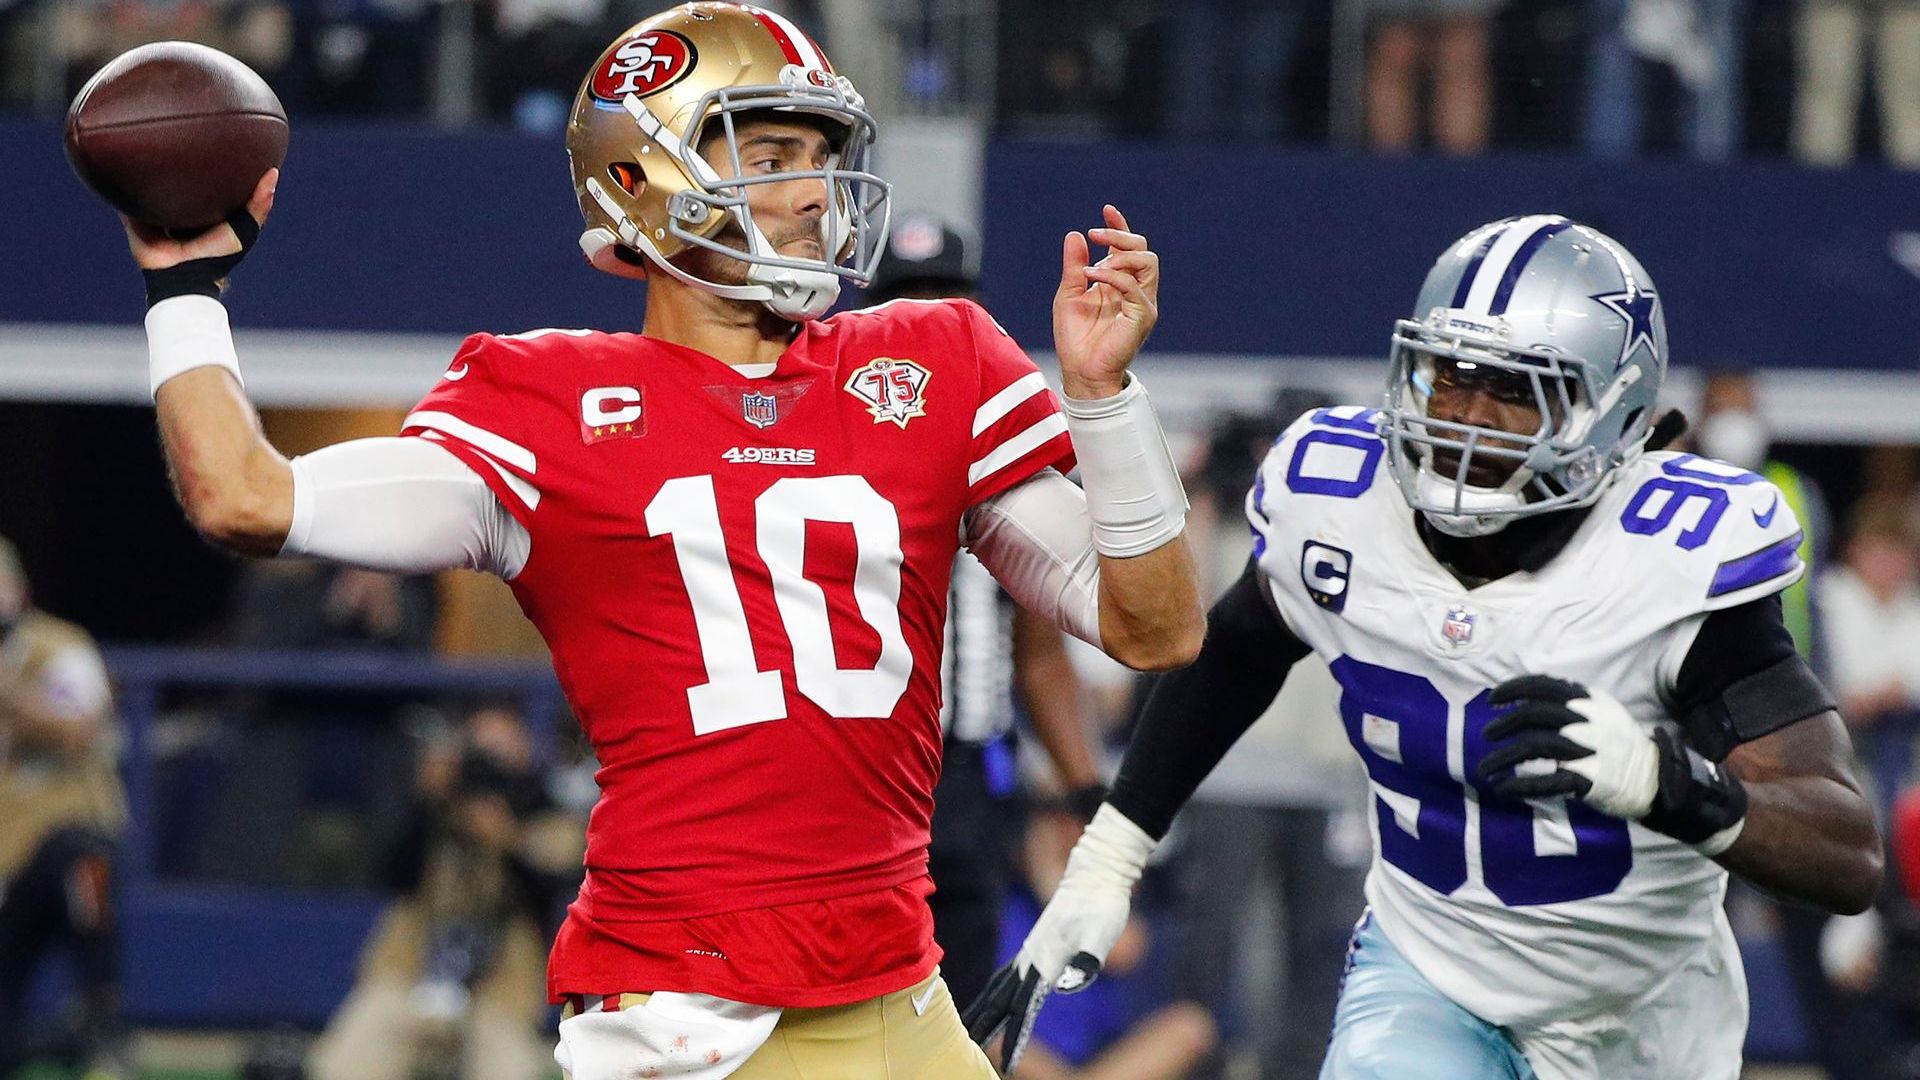 Video Shows Cowboys Fans Throwing Objects at Players After Loss to 49ers in  Wild Card Game